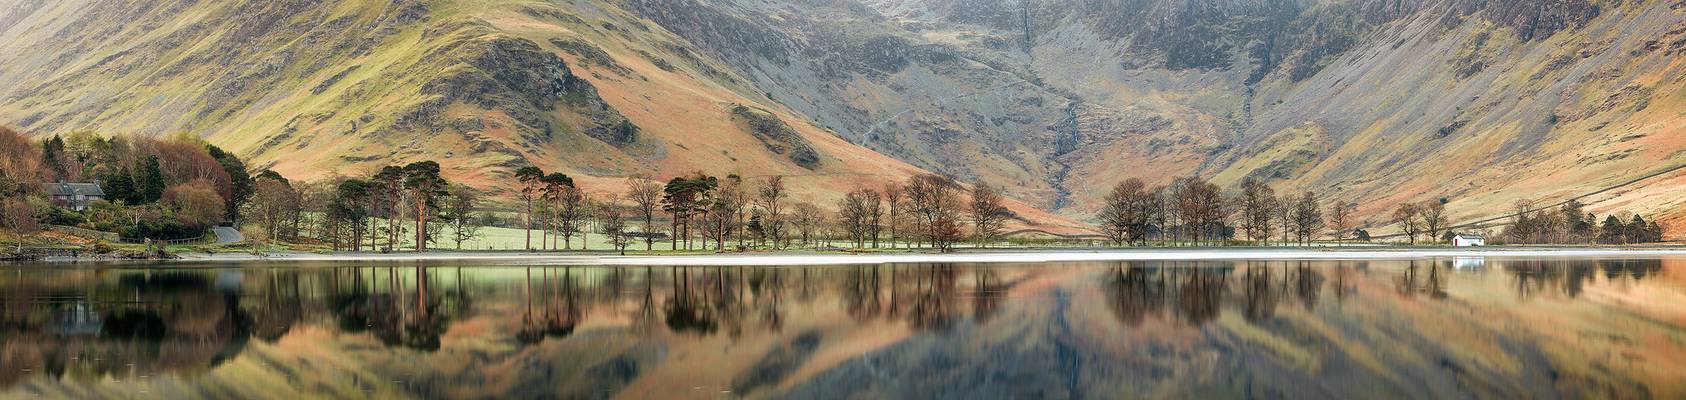 Buttermere serenity